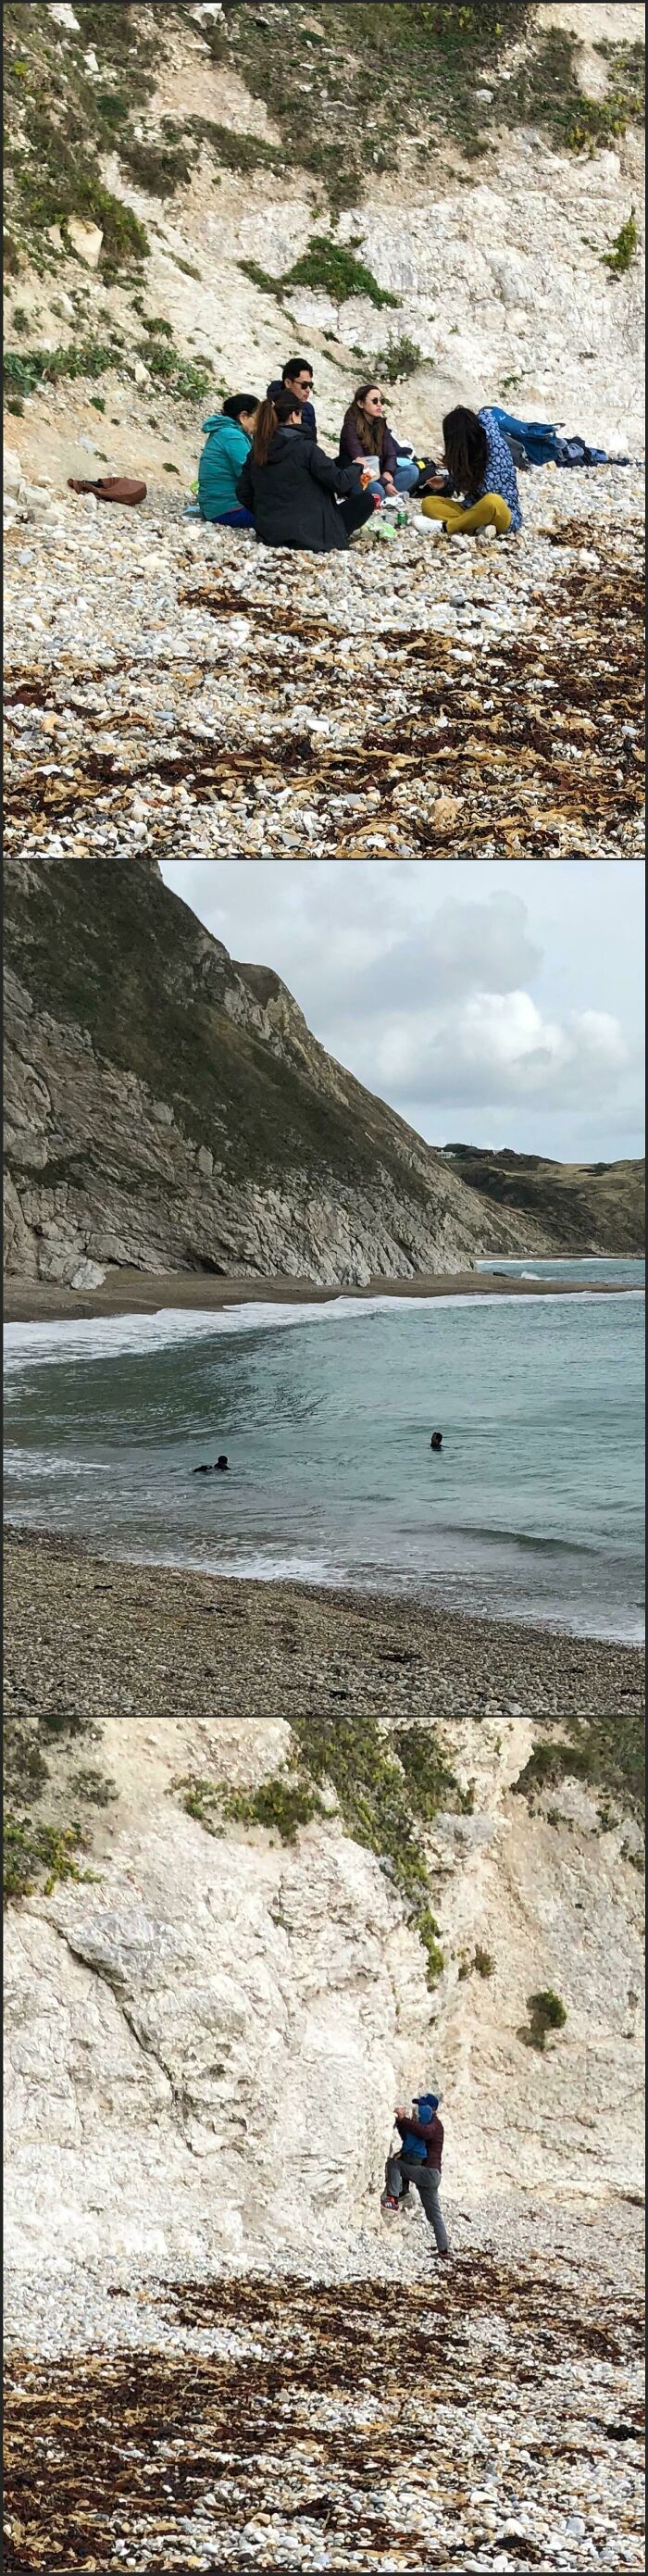 Entitled Tourists Have Picnic In Front Of Geological Outcropping, Refuse To Move For Geology Students Trying To Survey The Region, Let Their Kid Deface The Cliff Swim In A Red Flag Beach (Where Swimming Is Banned) And Leave Their Food Wrappers And Plastic Plates On The Beach At An Sssi